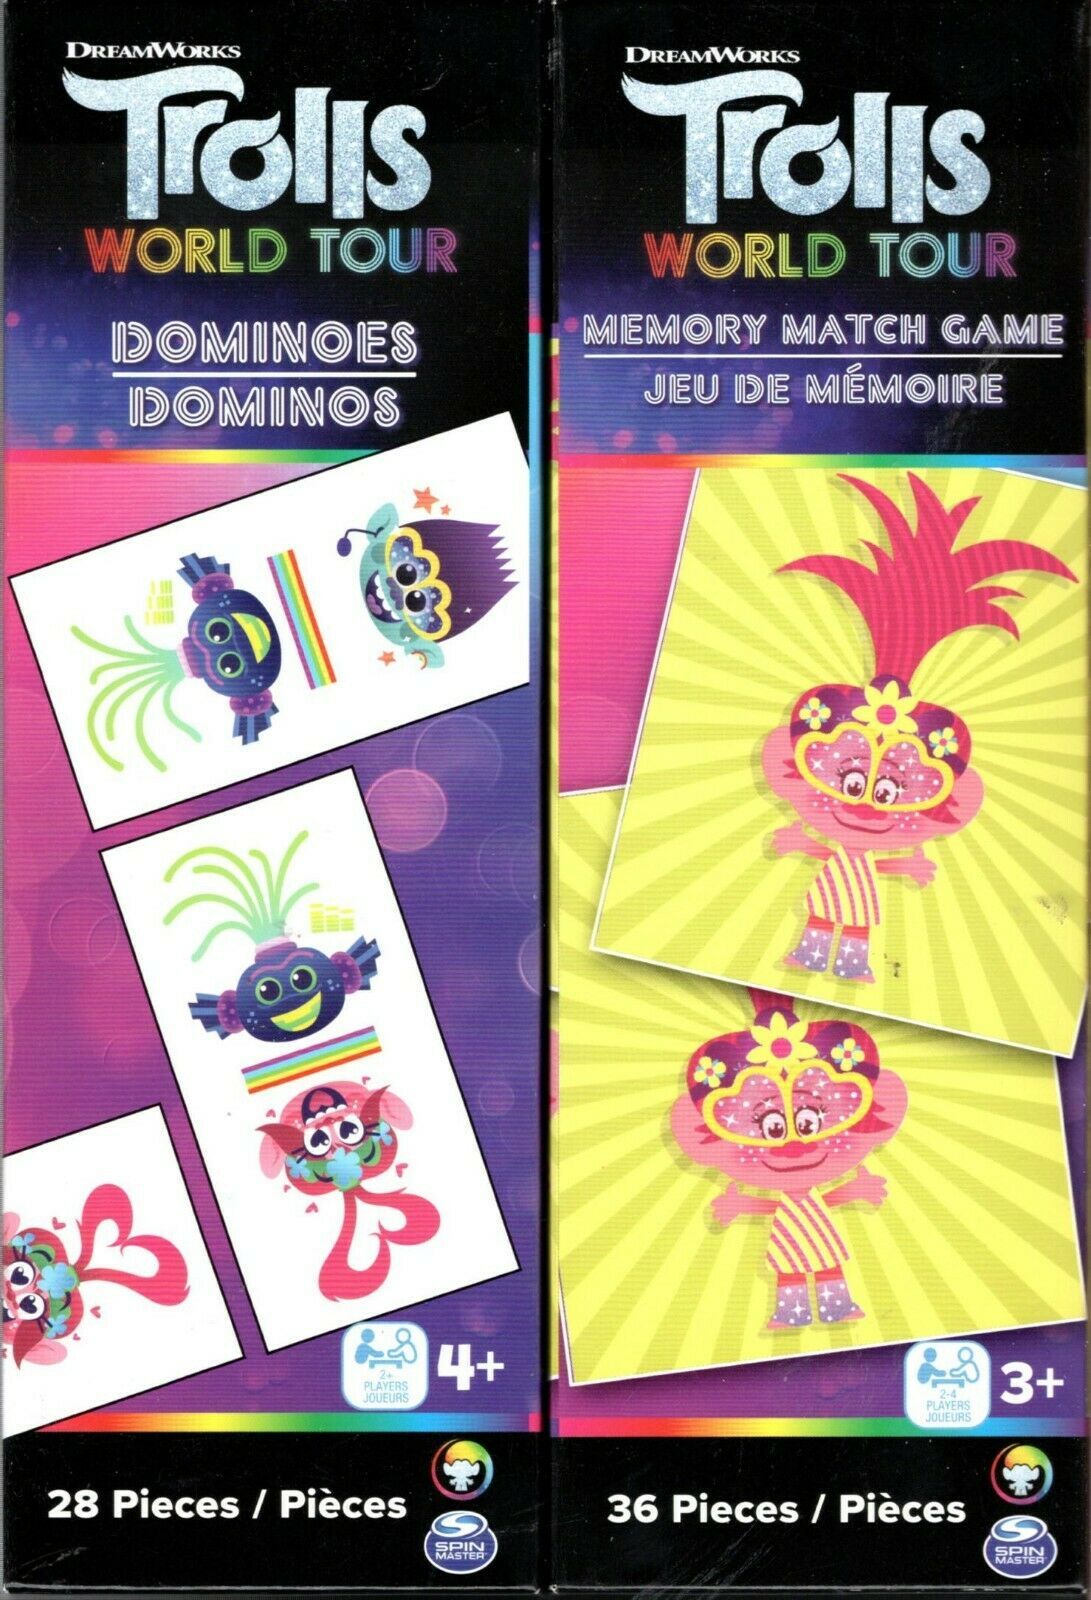 Trolls World Tour Dominoes Includes 28 Dominos